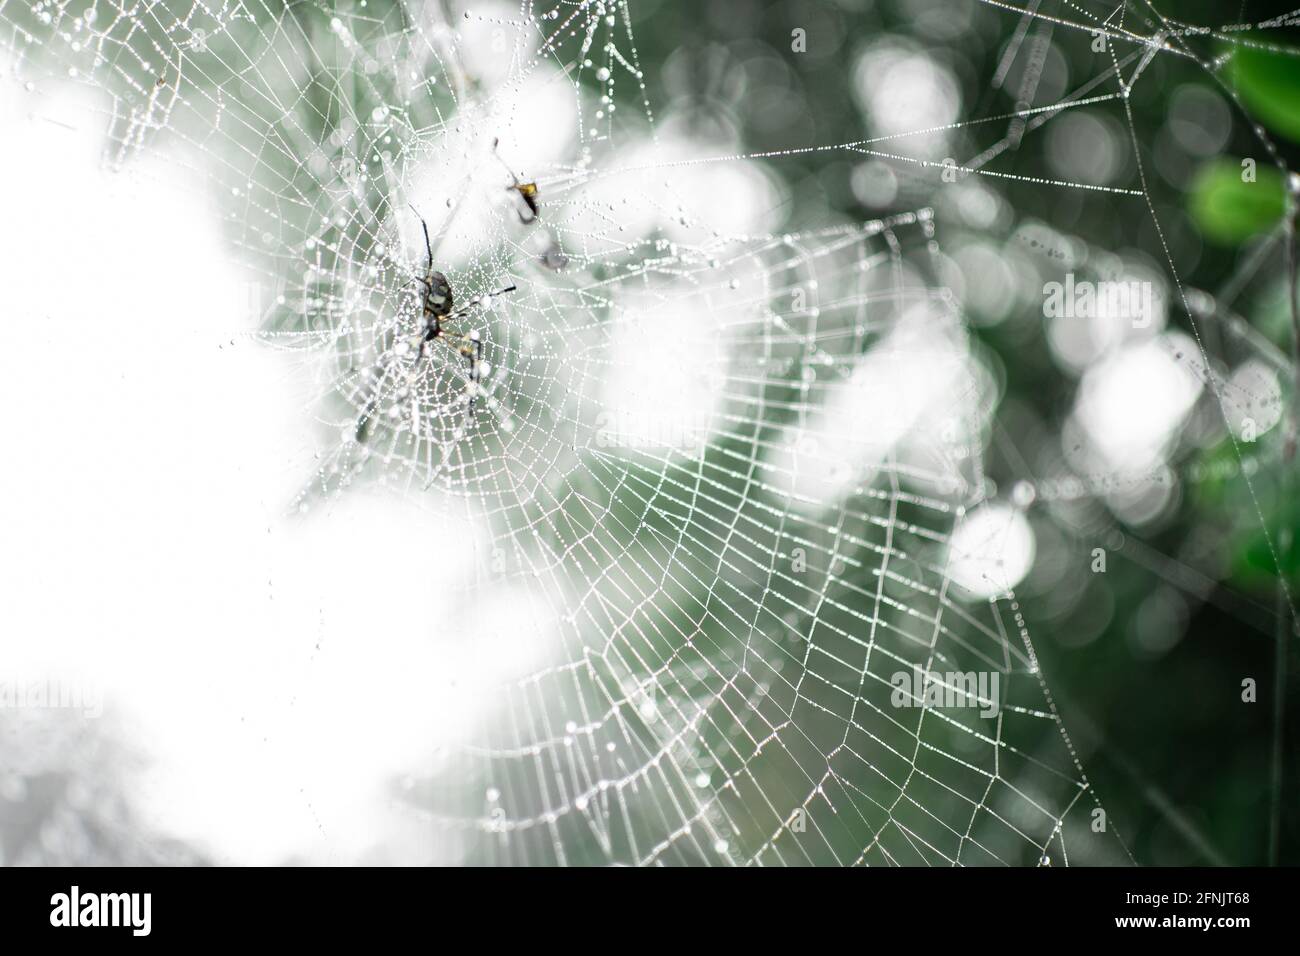 A spider in its spider web in the forest with dew rain drops on it, Shan state, Myanmar Stock Photo